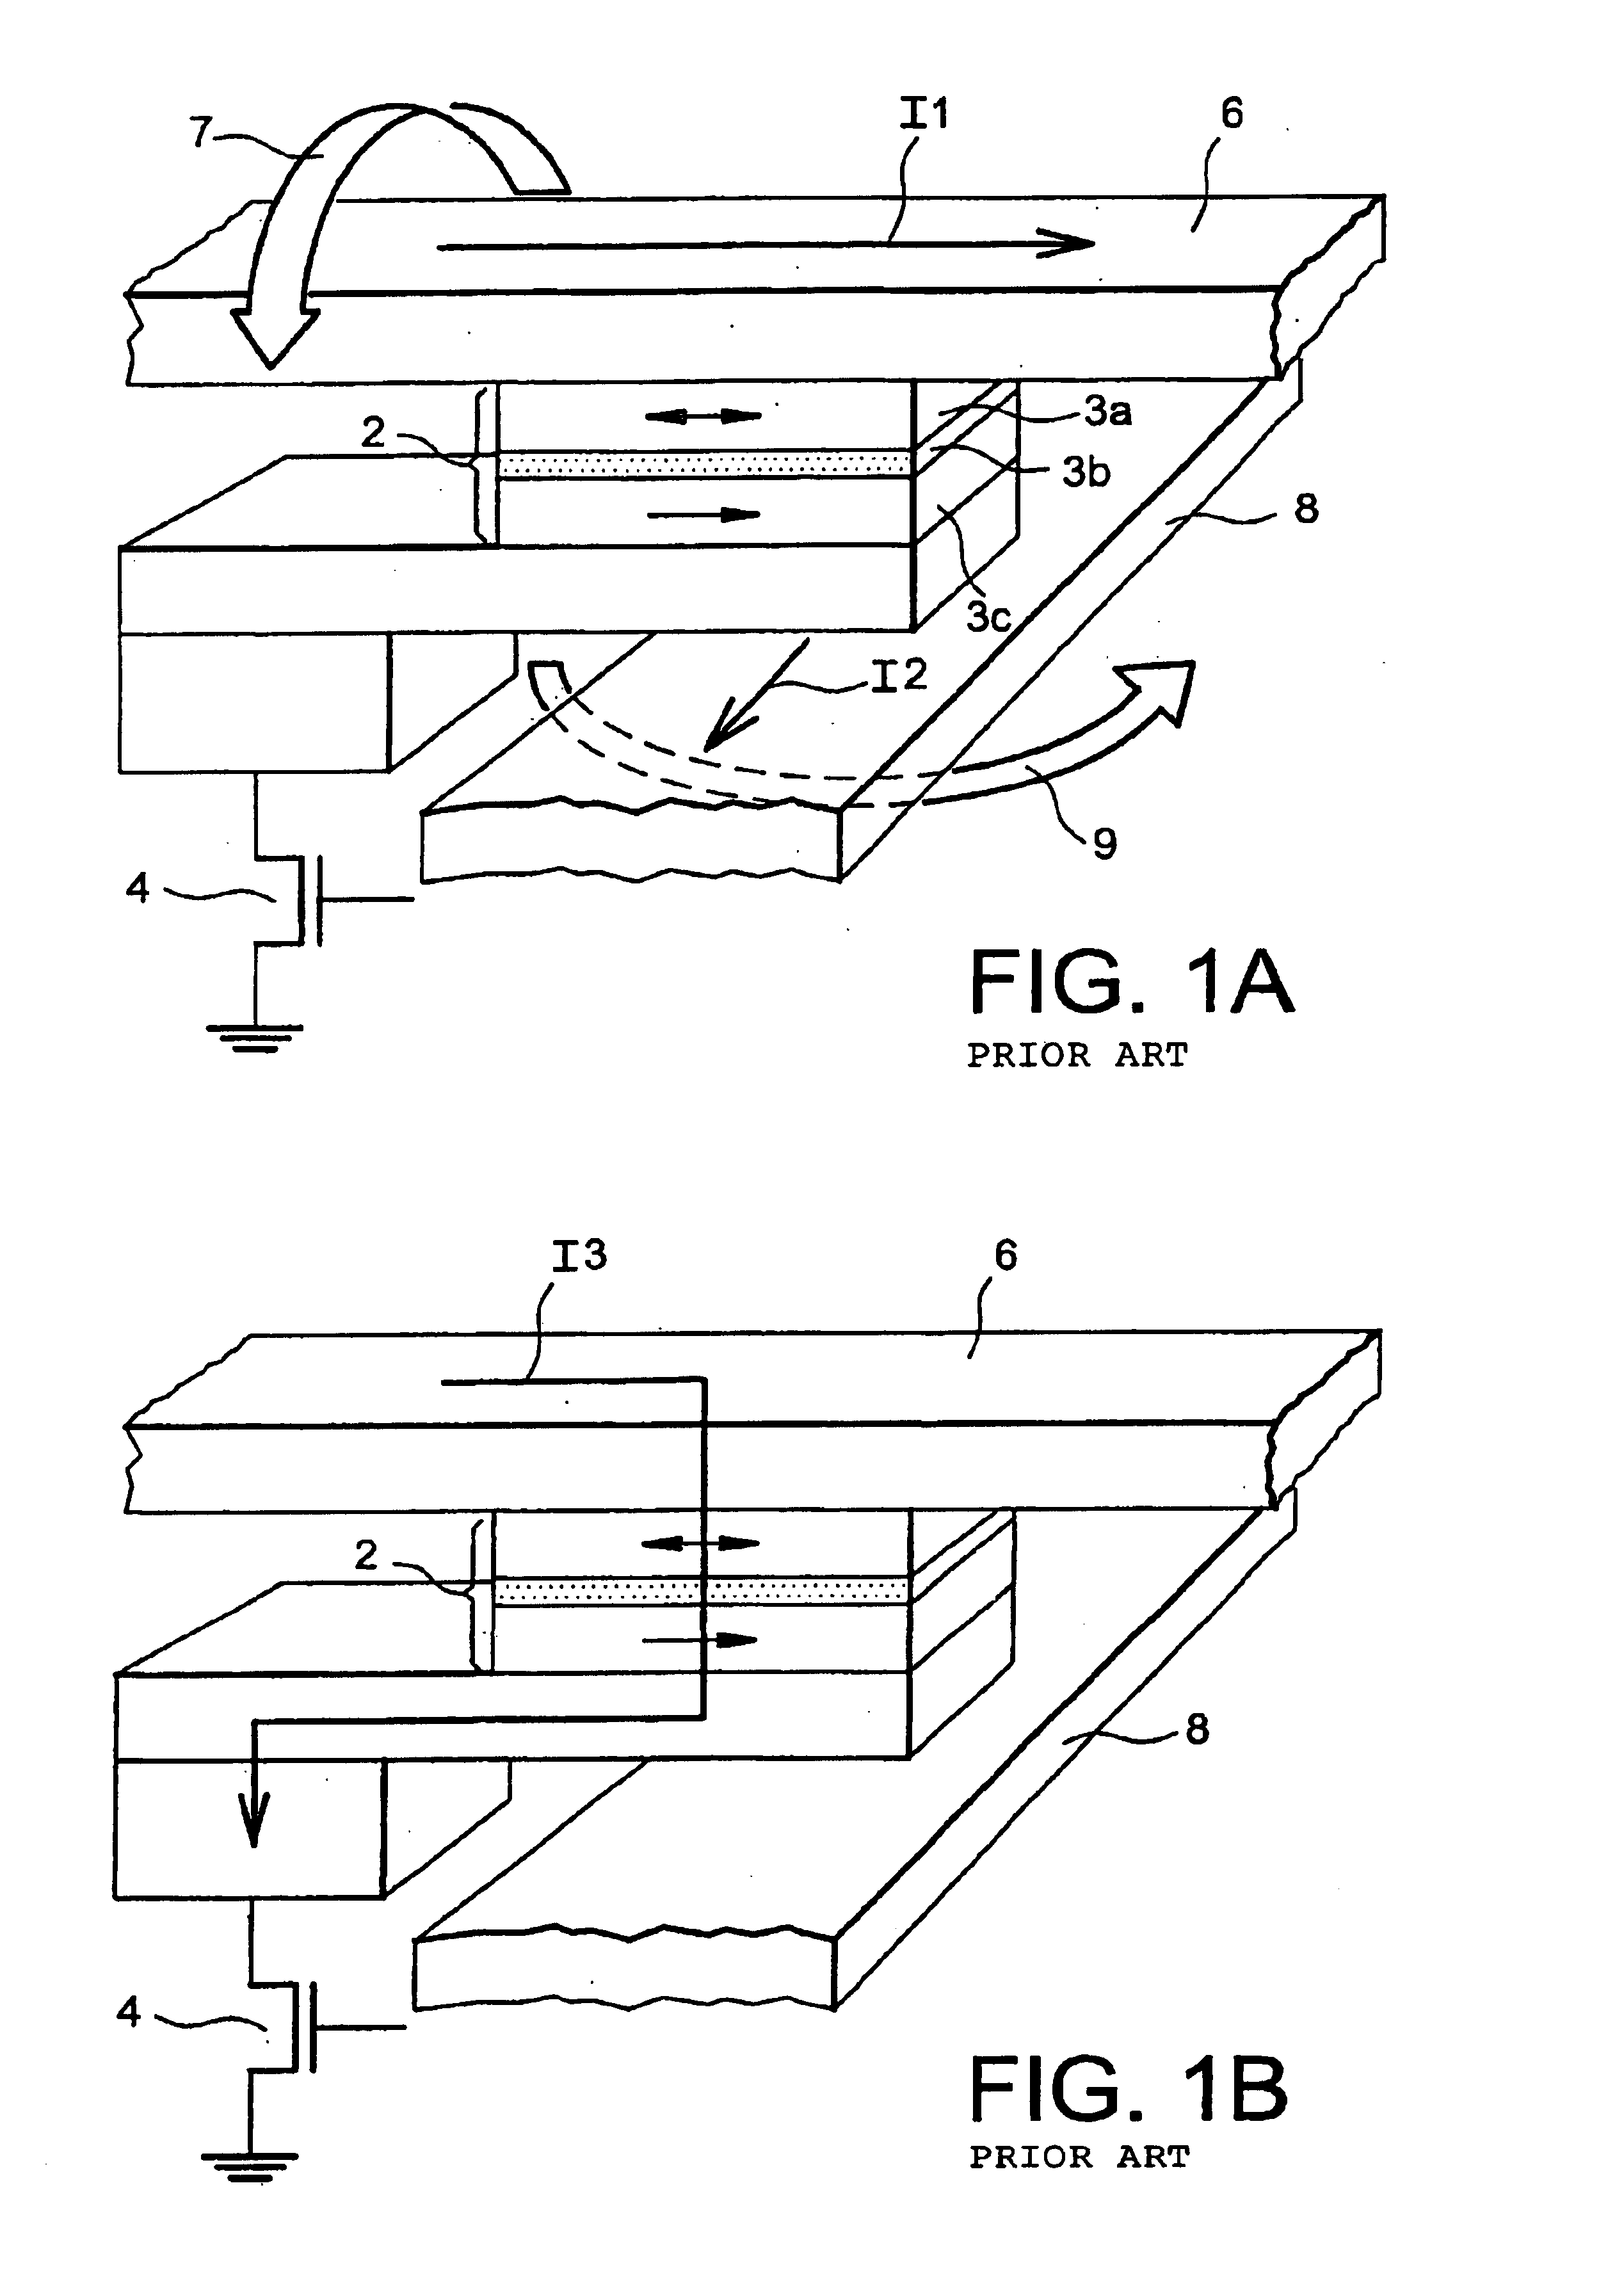 Magnetic tunnel junction magnetic device, memory and writing and reading methods using said device